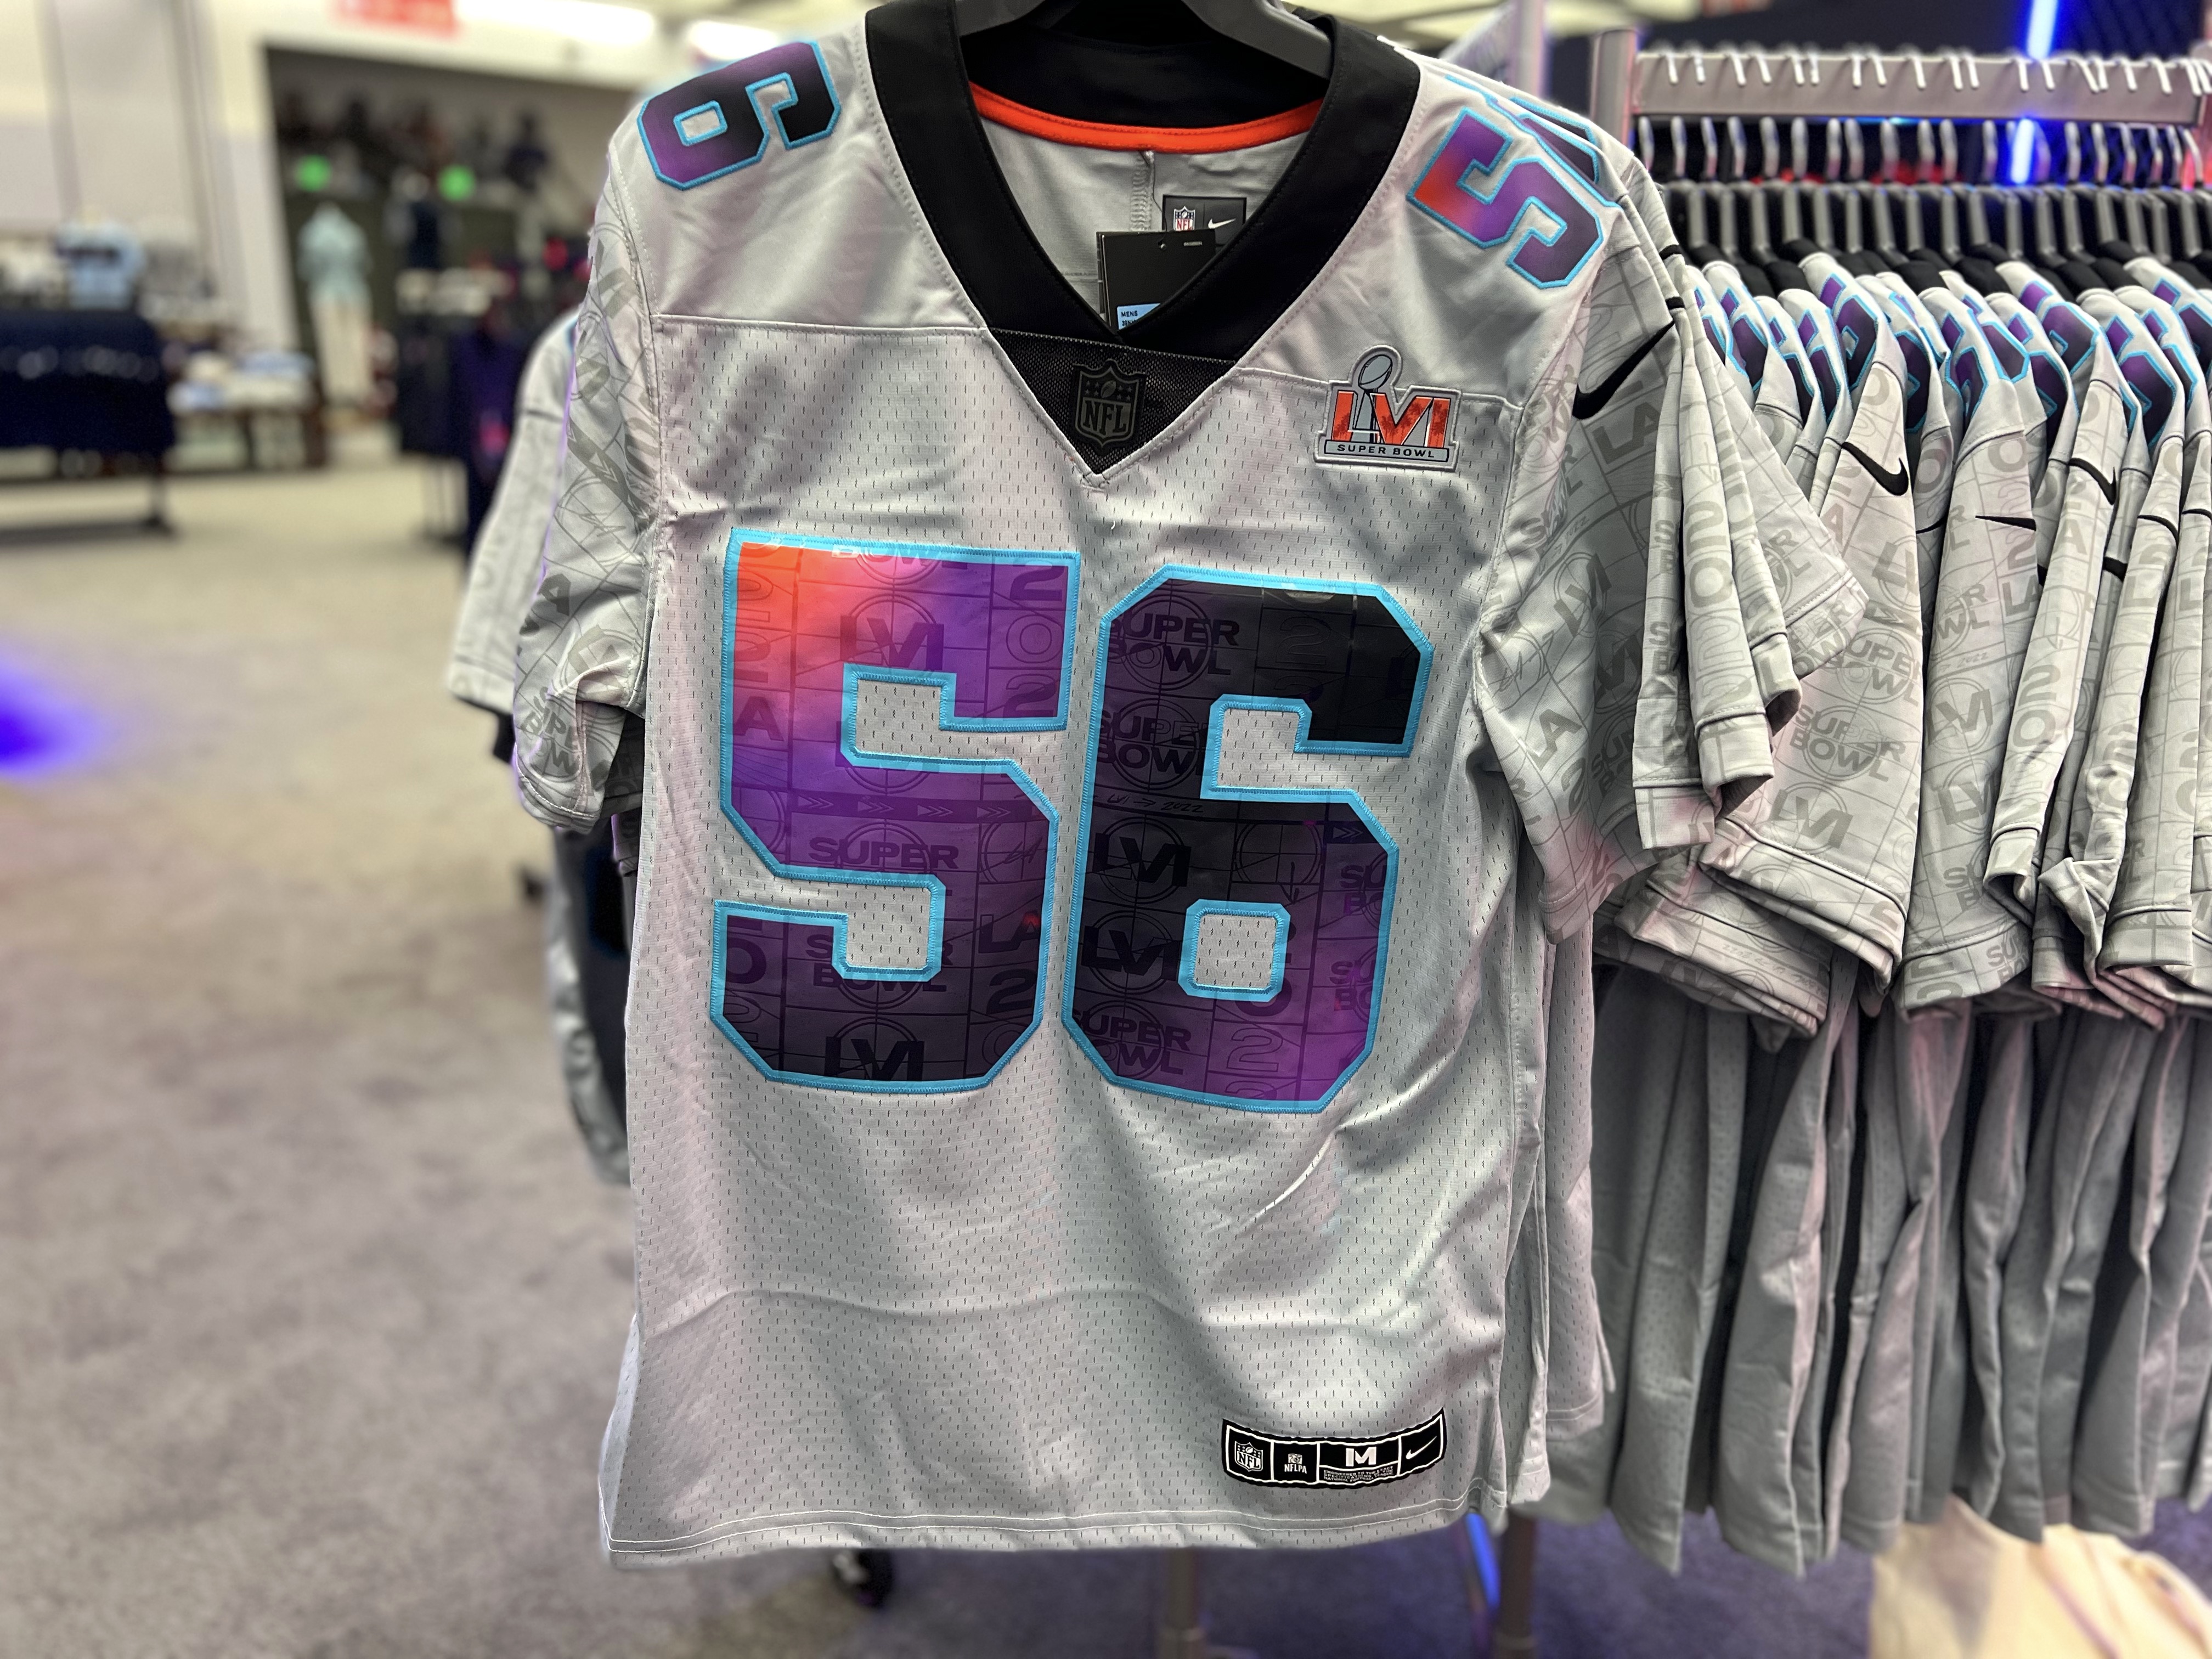 2019 Super Bowl Jerseys, T-Shirts: Get Gear From the Official NFL Shop